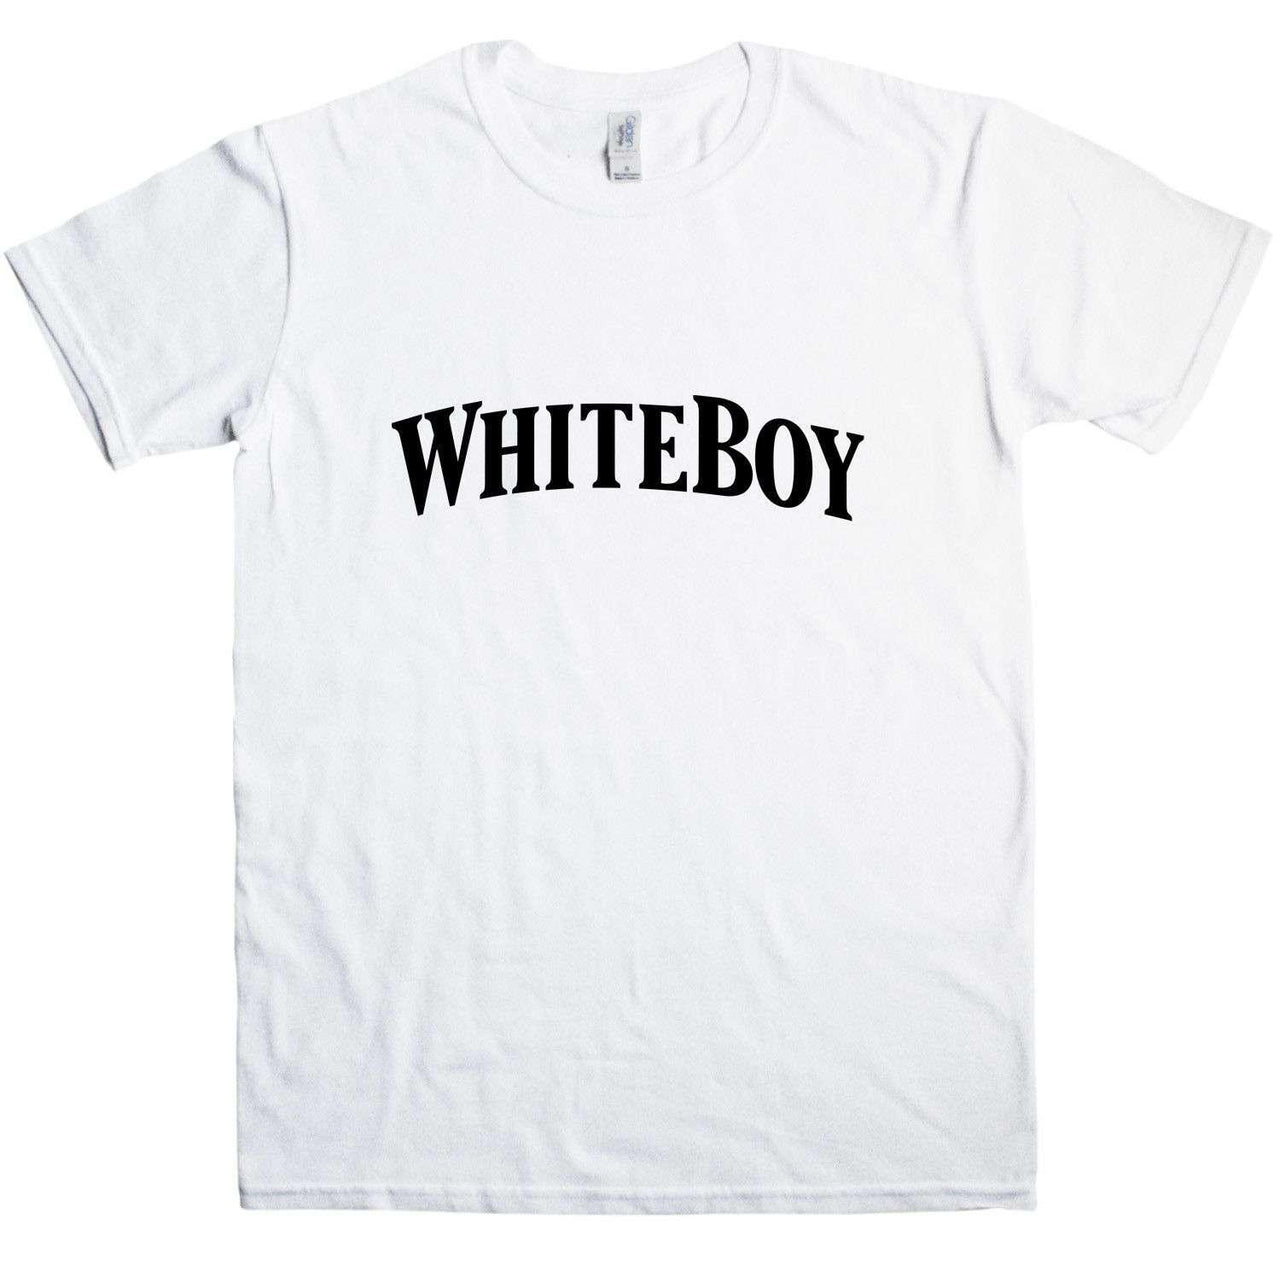 White Boy Graphic T-Shirt For Men As Worn By Tommy Lee 8Ball